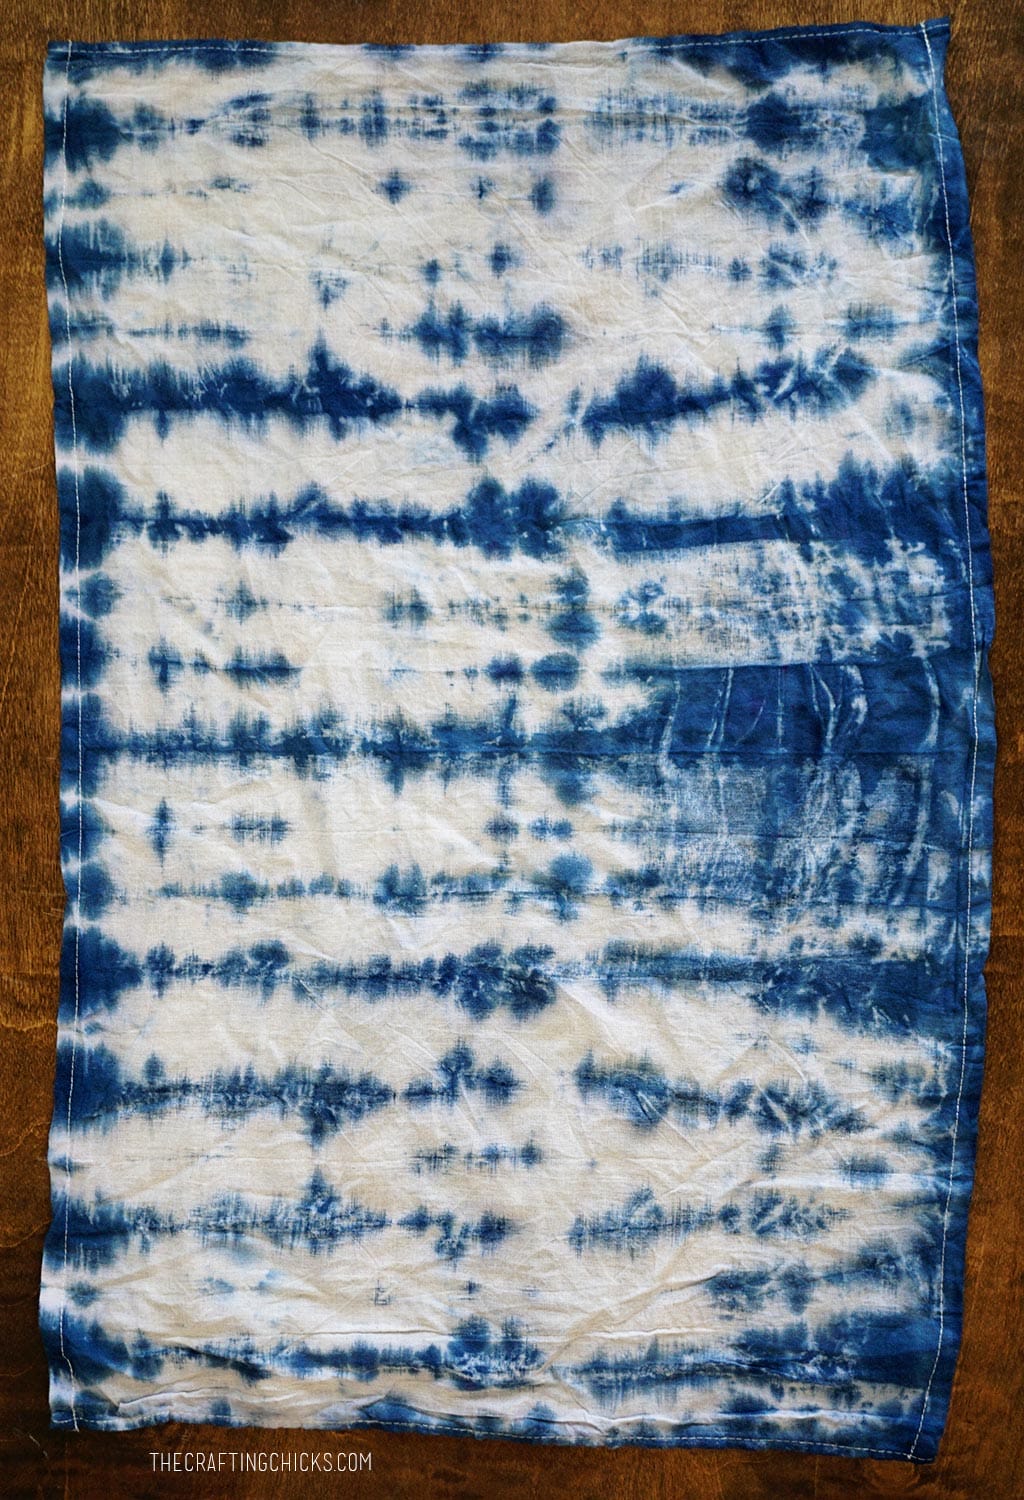 Results of rolled Shibori dyeing